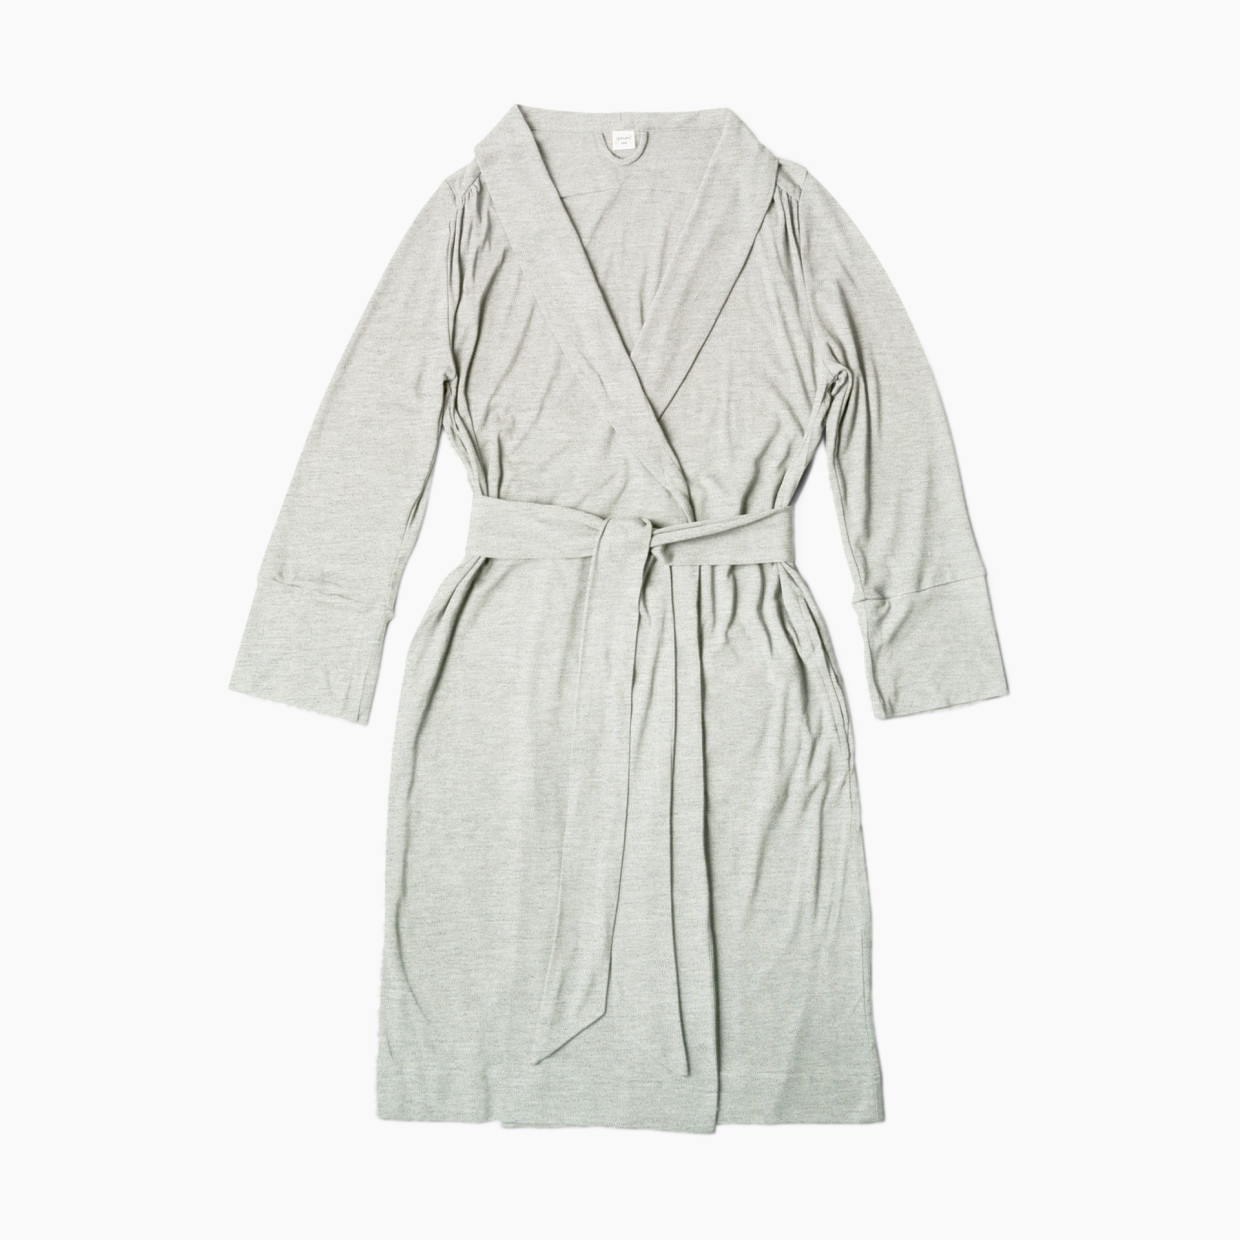 Goumi Kids You'll Live In Mom Robe - Storm Gray, X-Large/Xx-Large.